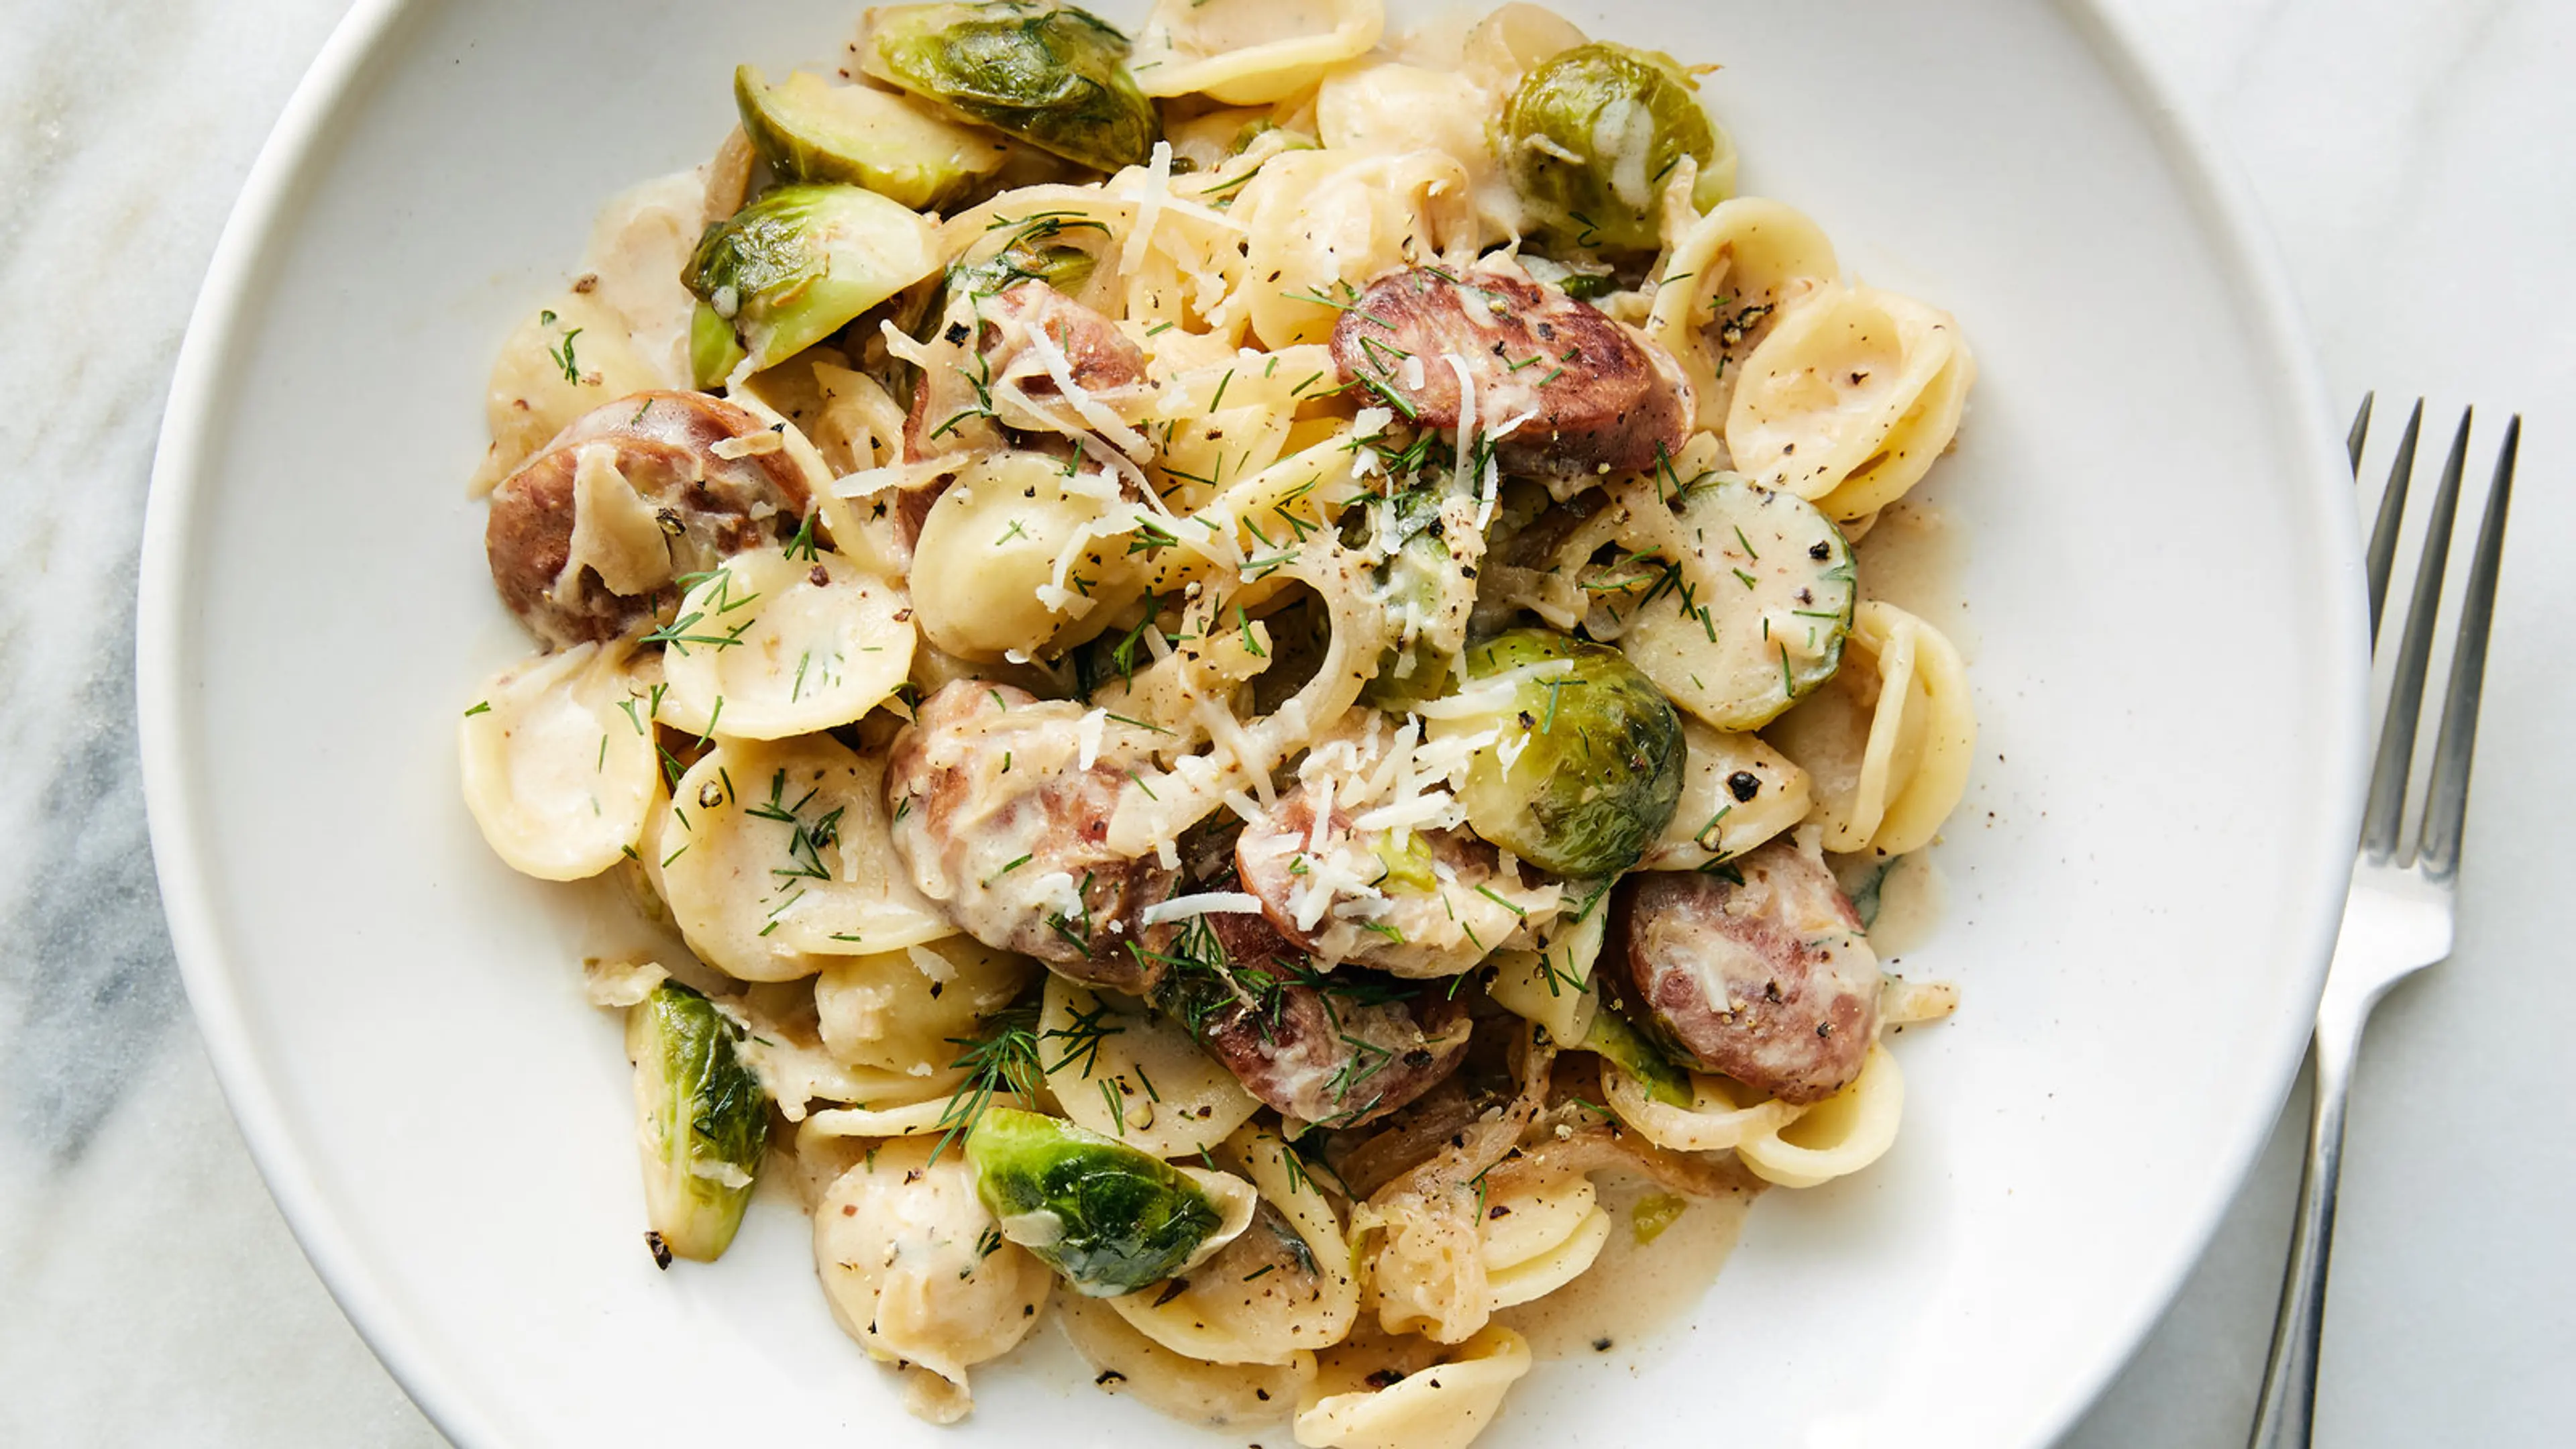 Orecchiette With Brussels Sprouts and Bratwurst